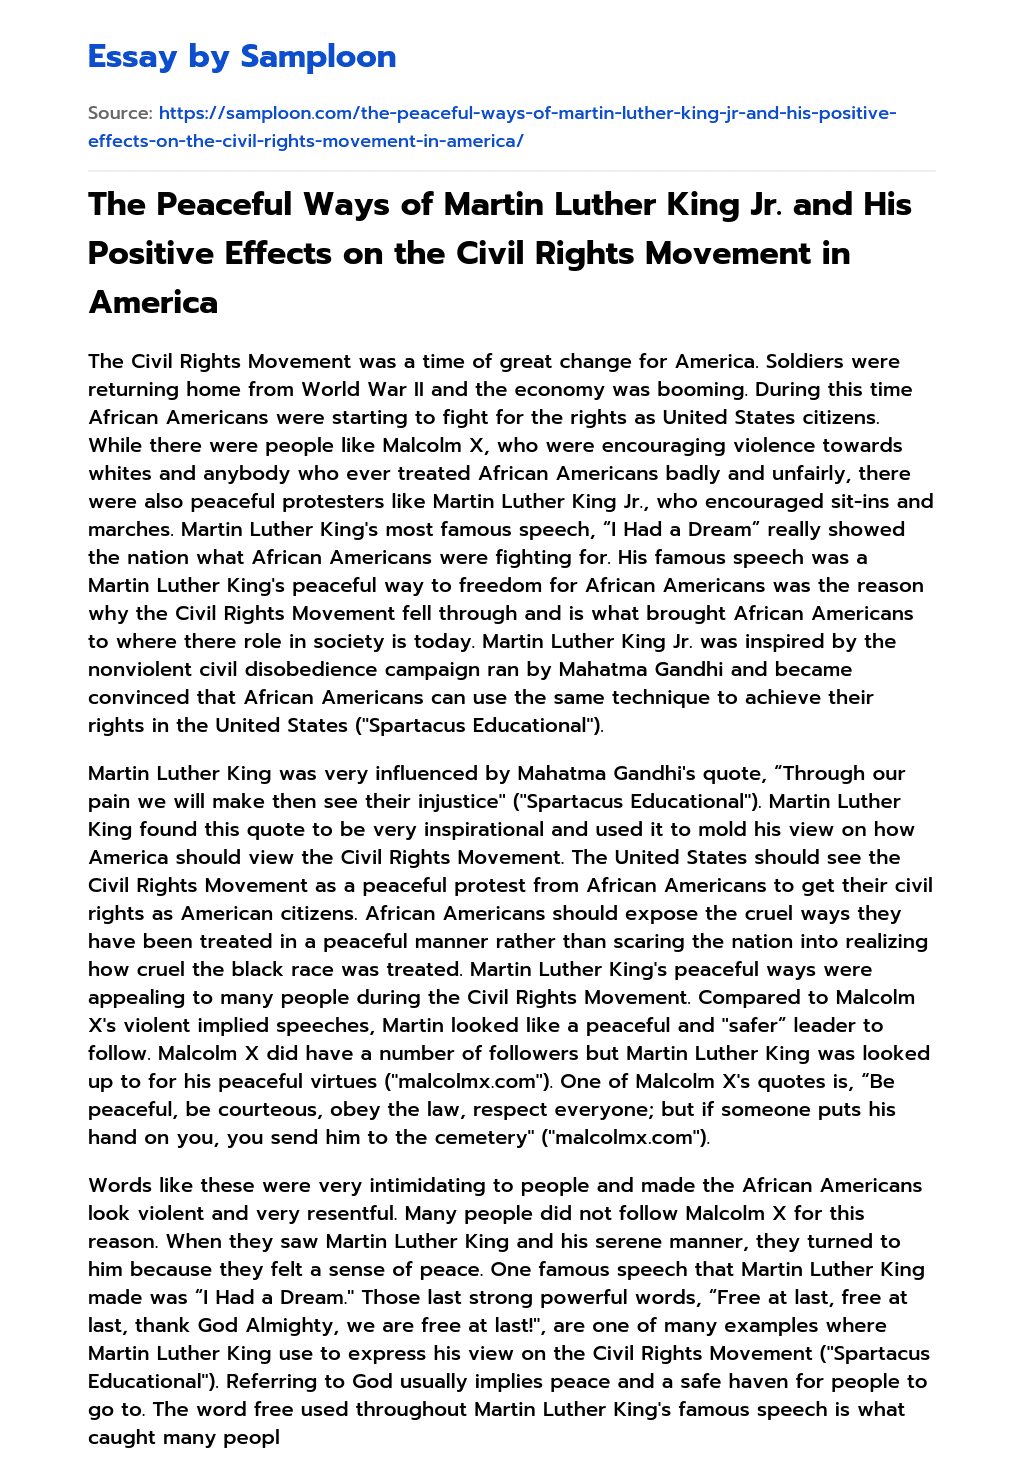 The Peaceful Ways of Martin Luther King Jr. and His Positive Effects on the Civil Rights Movement in America essay